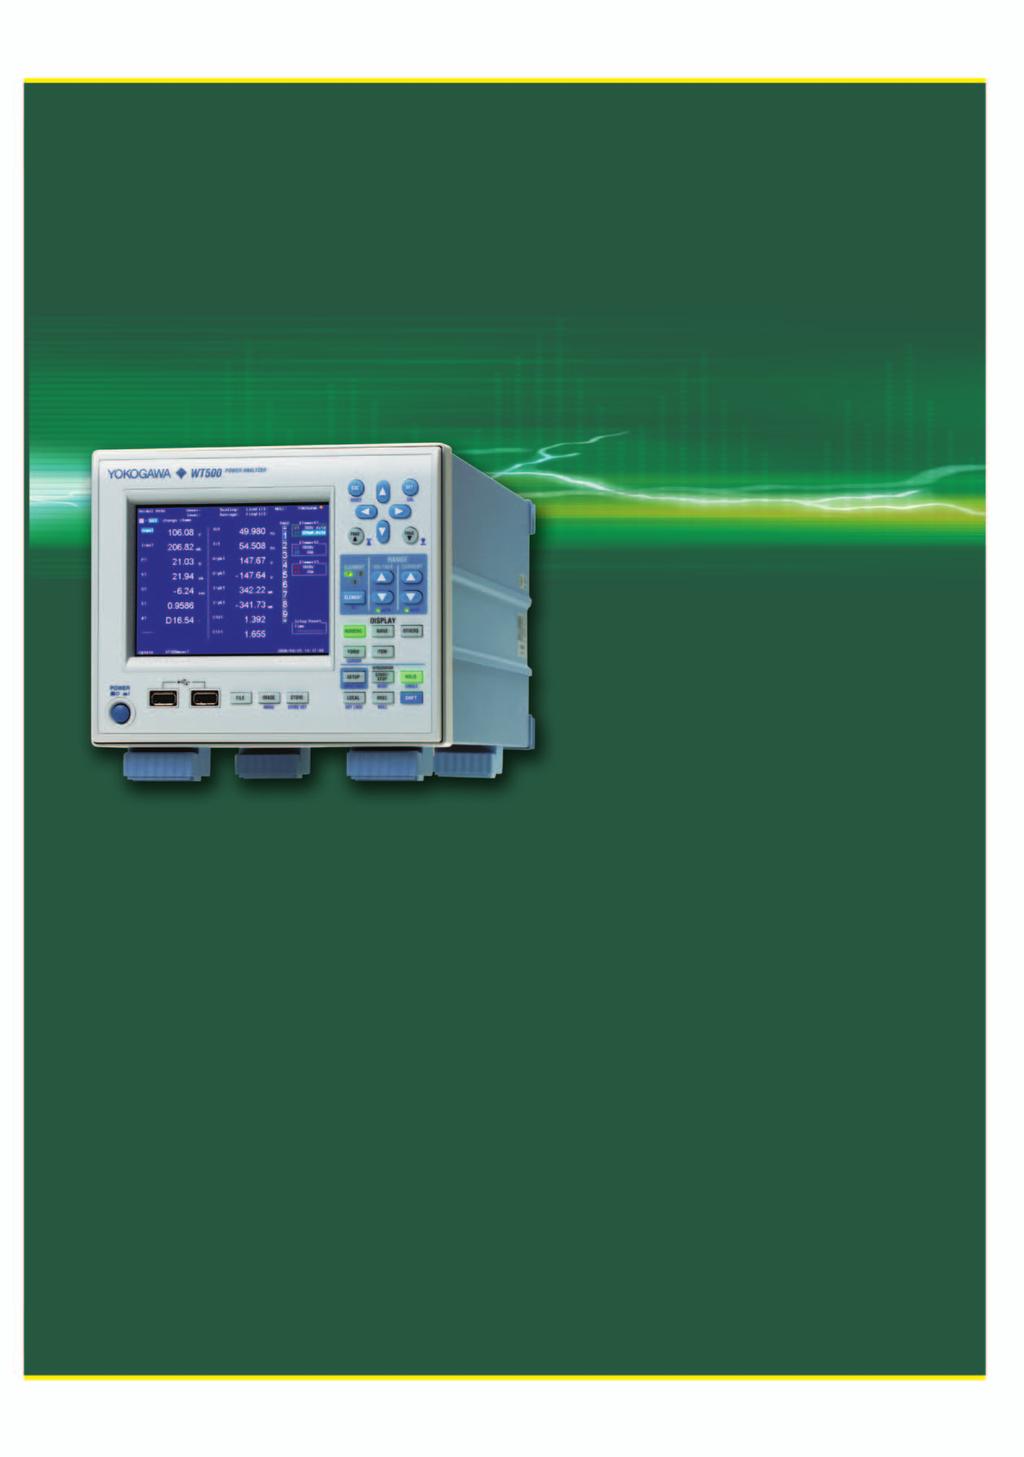 Power Analyzer Power Analyzer Simultaneous measurement of voltage, current, power, and harmonics High-speed data updating (00 ms) Display of numerical values, waveforms and trends Measurement of